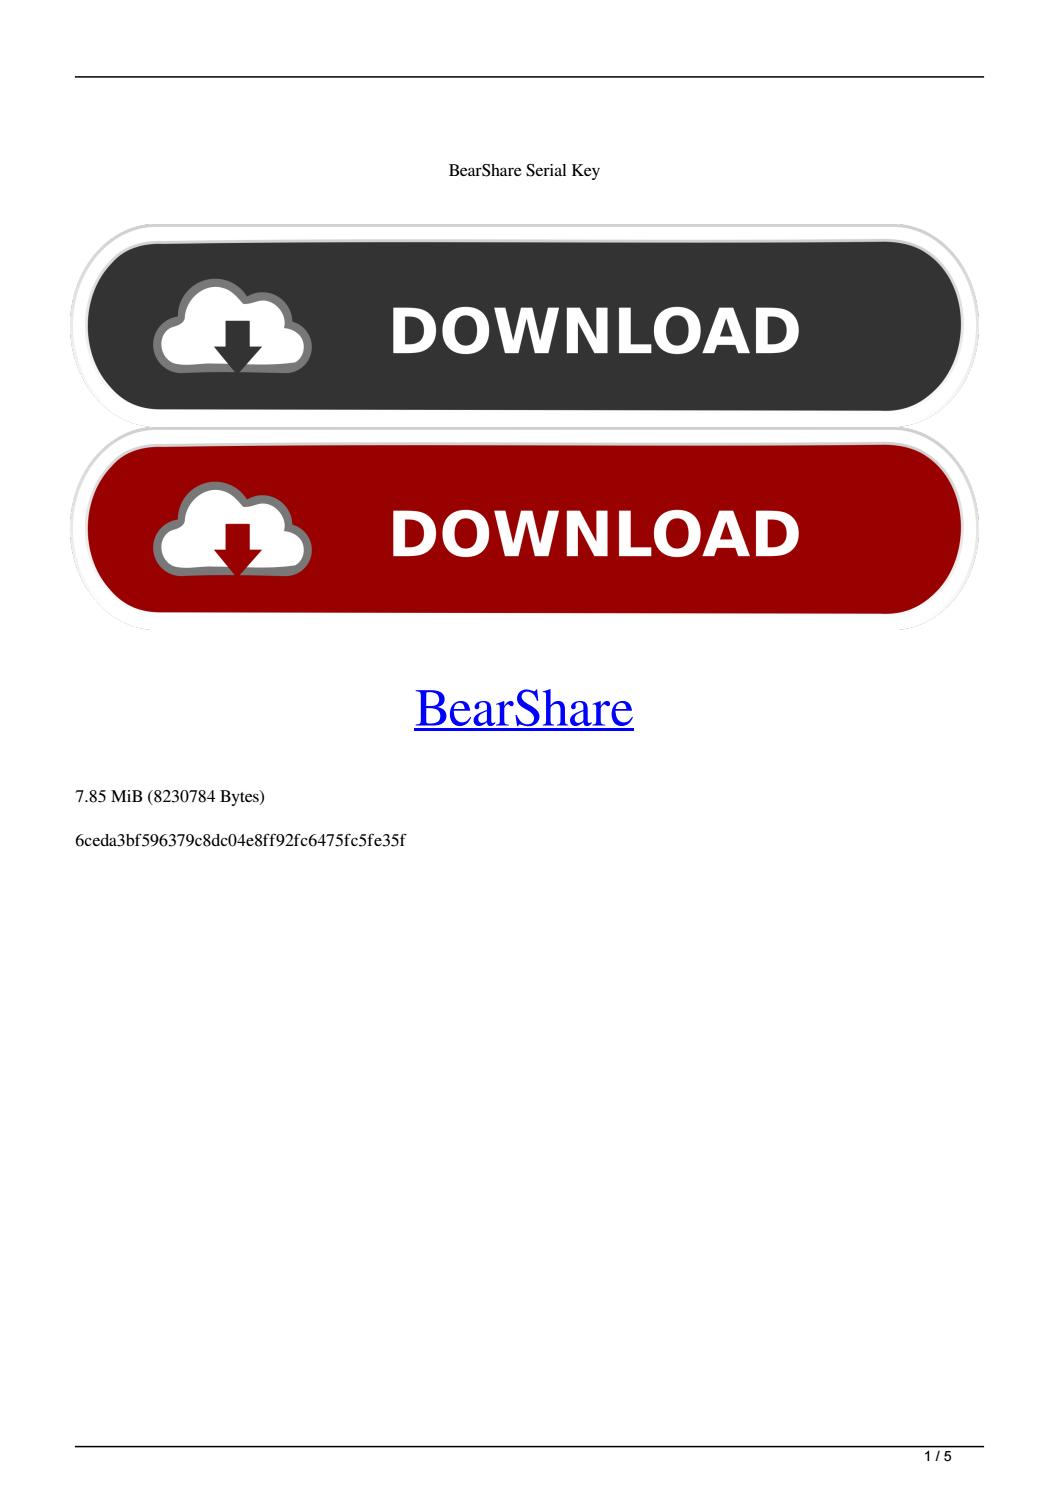 Bearshare music download free, software